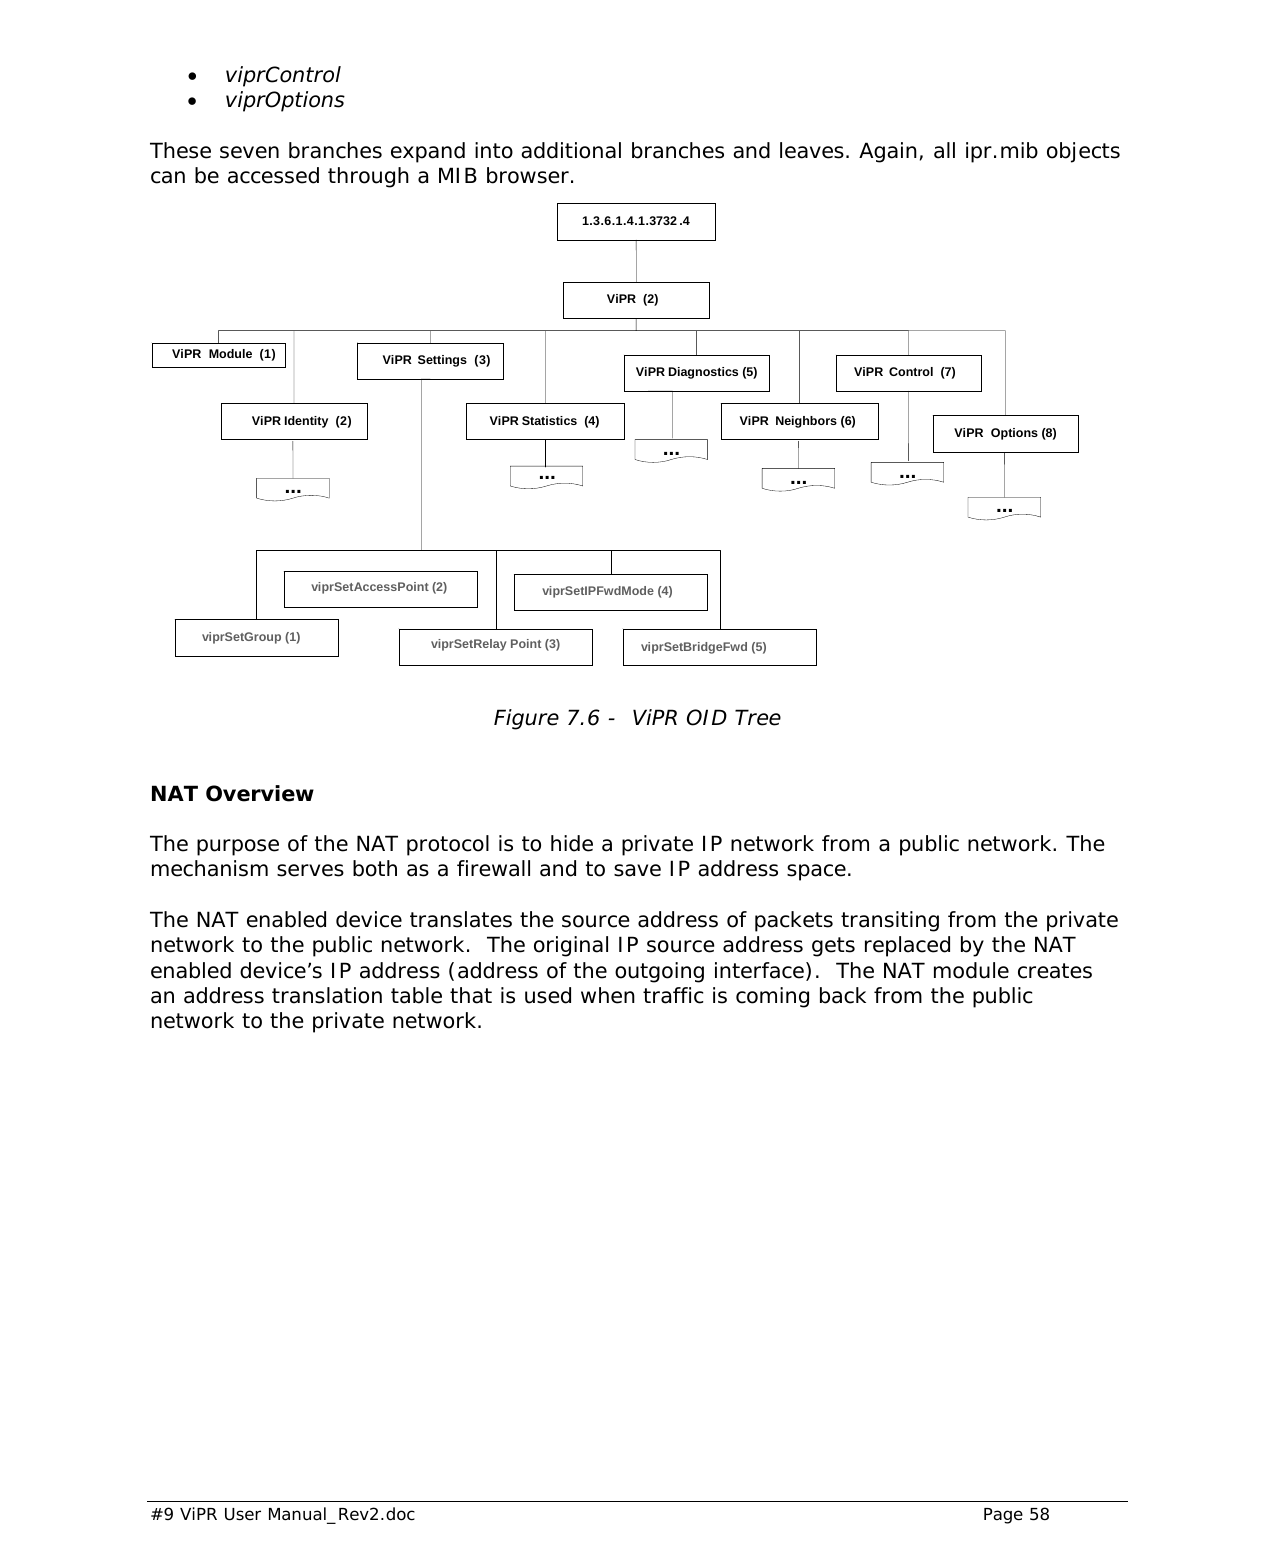  #9 ViPR User Manual_Rev2.doc    Page 58  • viprControl  • viprOptions  These seven branches expand into additional branches and leaves. Again, all ipr.mib objects can be accessed through a MIB browser.              Figure 7.6 -  ViPR OID Tree  NAT Overview The purpose of the NAT protocol is to hide a private IP network from a public network. The mechanism serves both as a firewall and to save IP address space.  The NAT enabled device translates the source address of packets transiting from the private network to the public network.  The original IP source address gets replaced by the NAT enabled device’s IP address (address of the outgoing interface).  The NAT module creates an address translation table that is used when traffic is coming back from the public network to the private network.   ViPR Module  ( 1 ) ViPR Identity  ( 2 ) ViPR Settings  ( 3 ) ViPR Diagnostics (5)  ViPR Neighbors (6)  ViPR Control  (7) ViPR Options (8)  ViPR  (2) ViPR Statistics  (4)  1 . 3 . 6 . 1 . 4 . 1 . 3732 . 4 ... ... ... ... ... ... viprSetRelay Point (3)  viprSetIPFwdMode (4)  viprSetBridgeFwd (5)  viprSetGroup (1)  viprSetAccessPoint (2) 